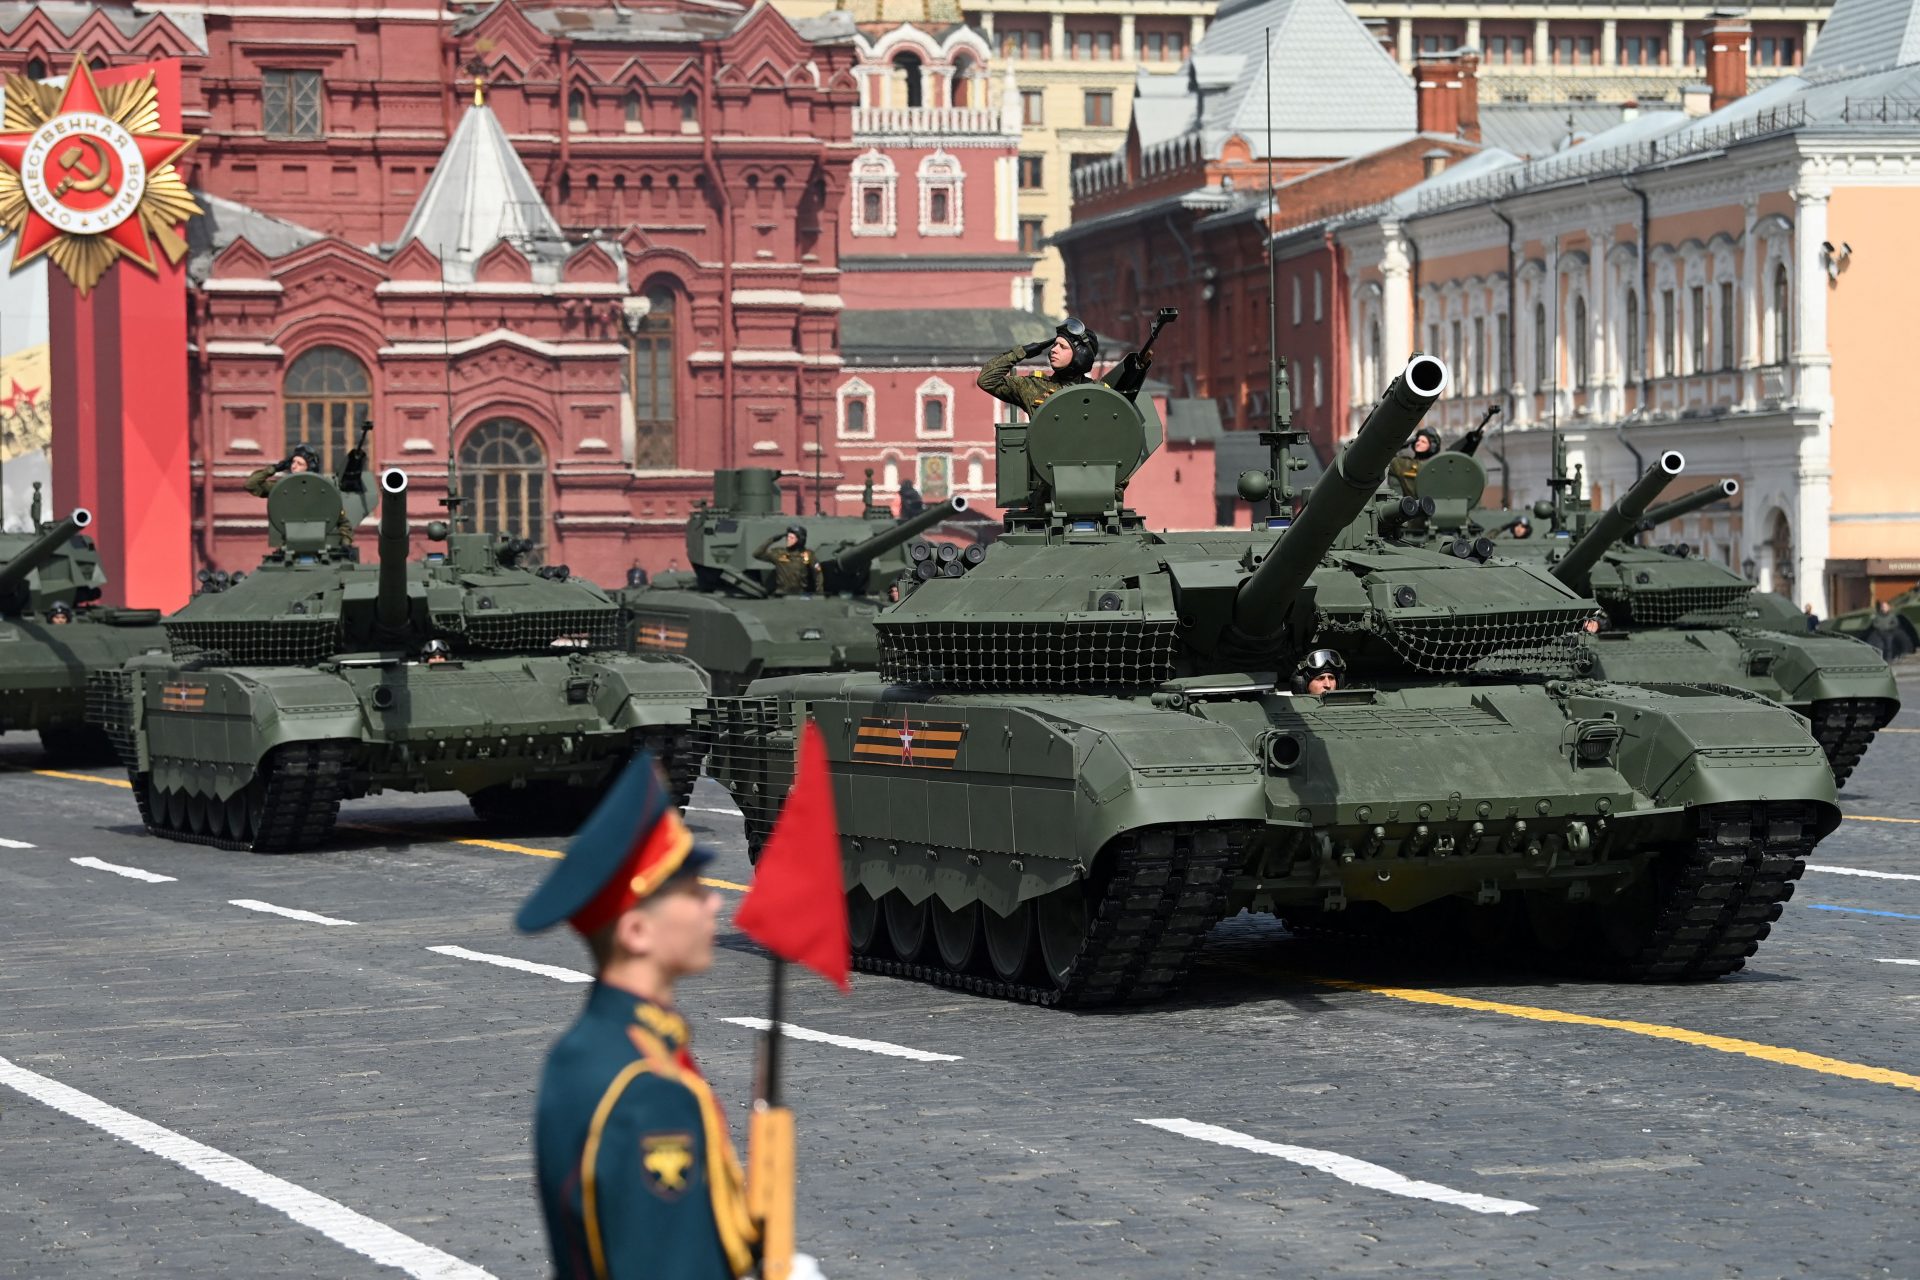 What became of the advanced tanks Russia sent to Ukraine?